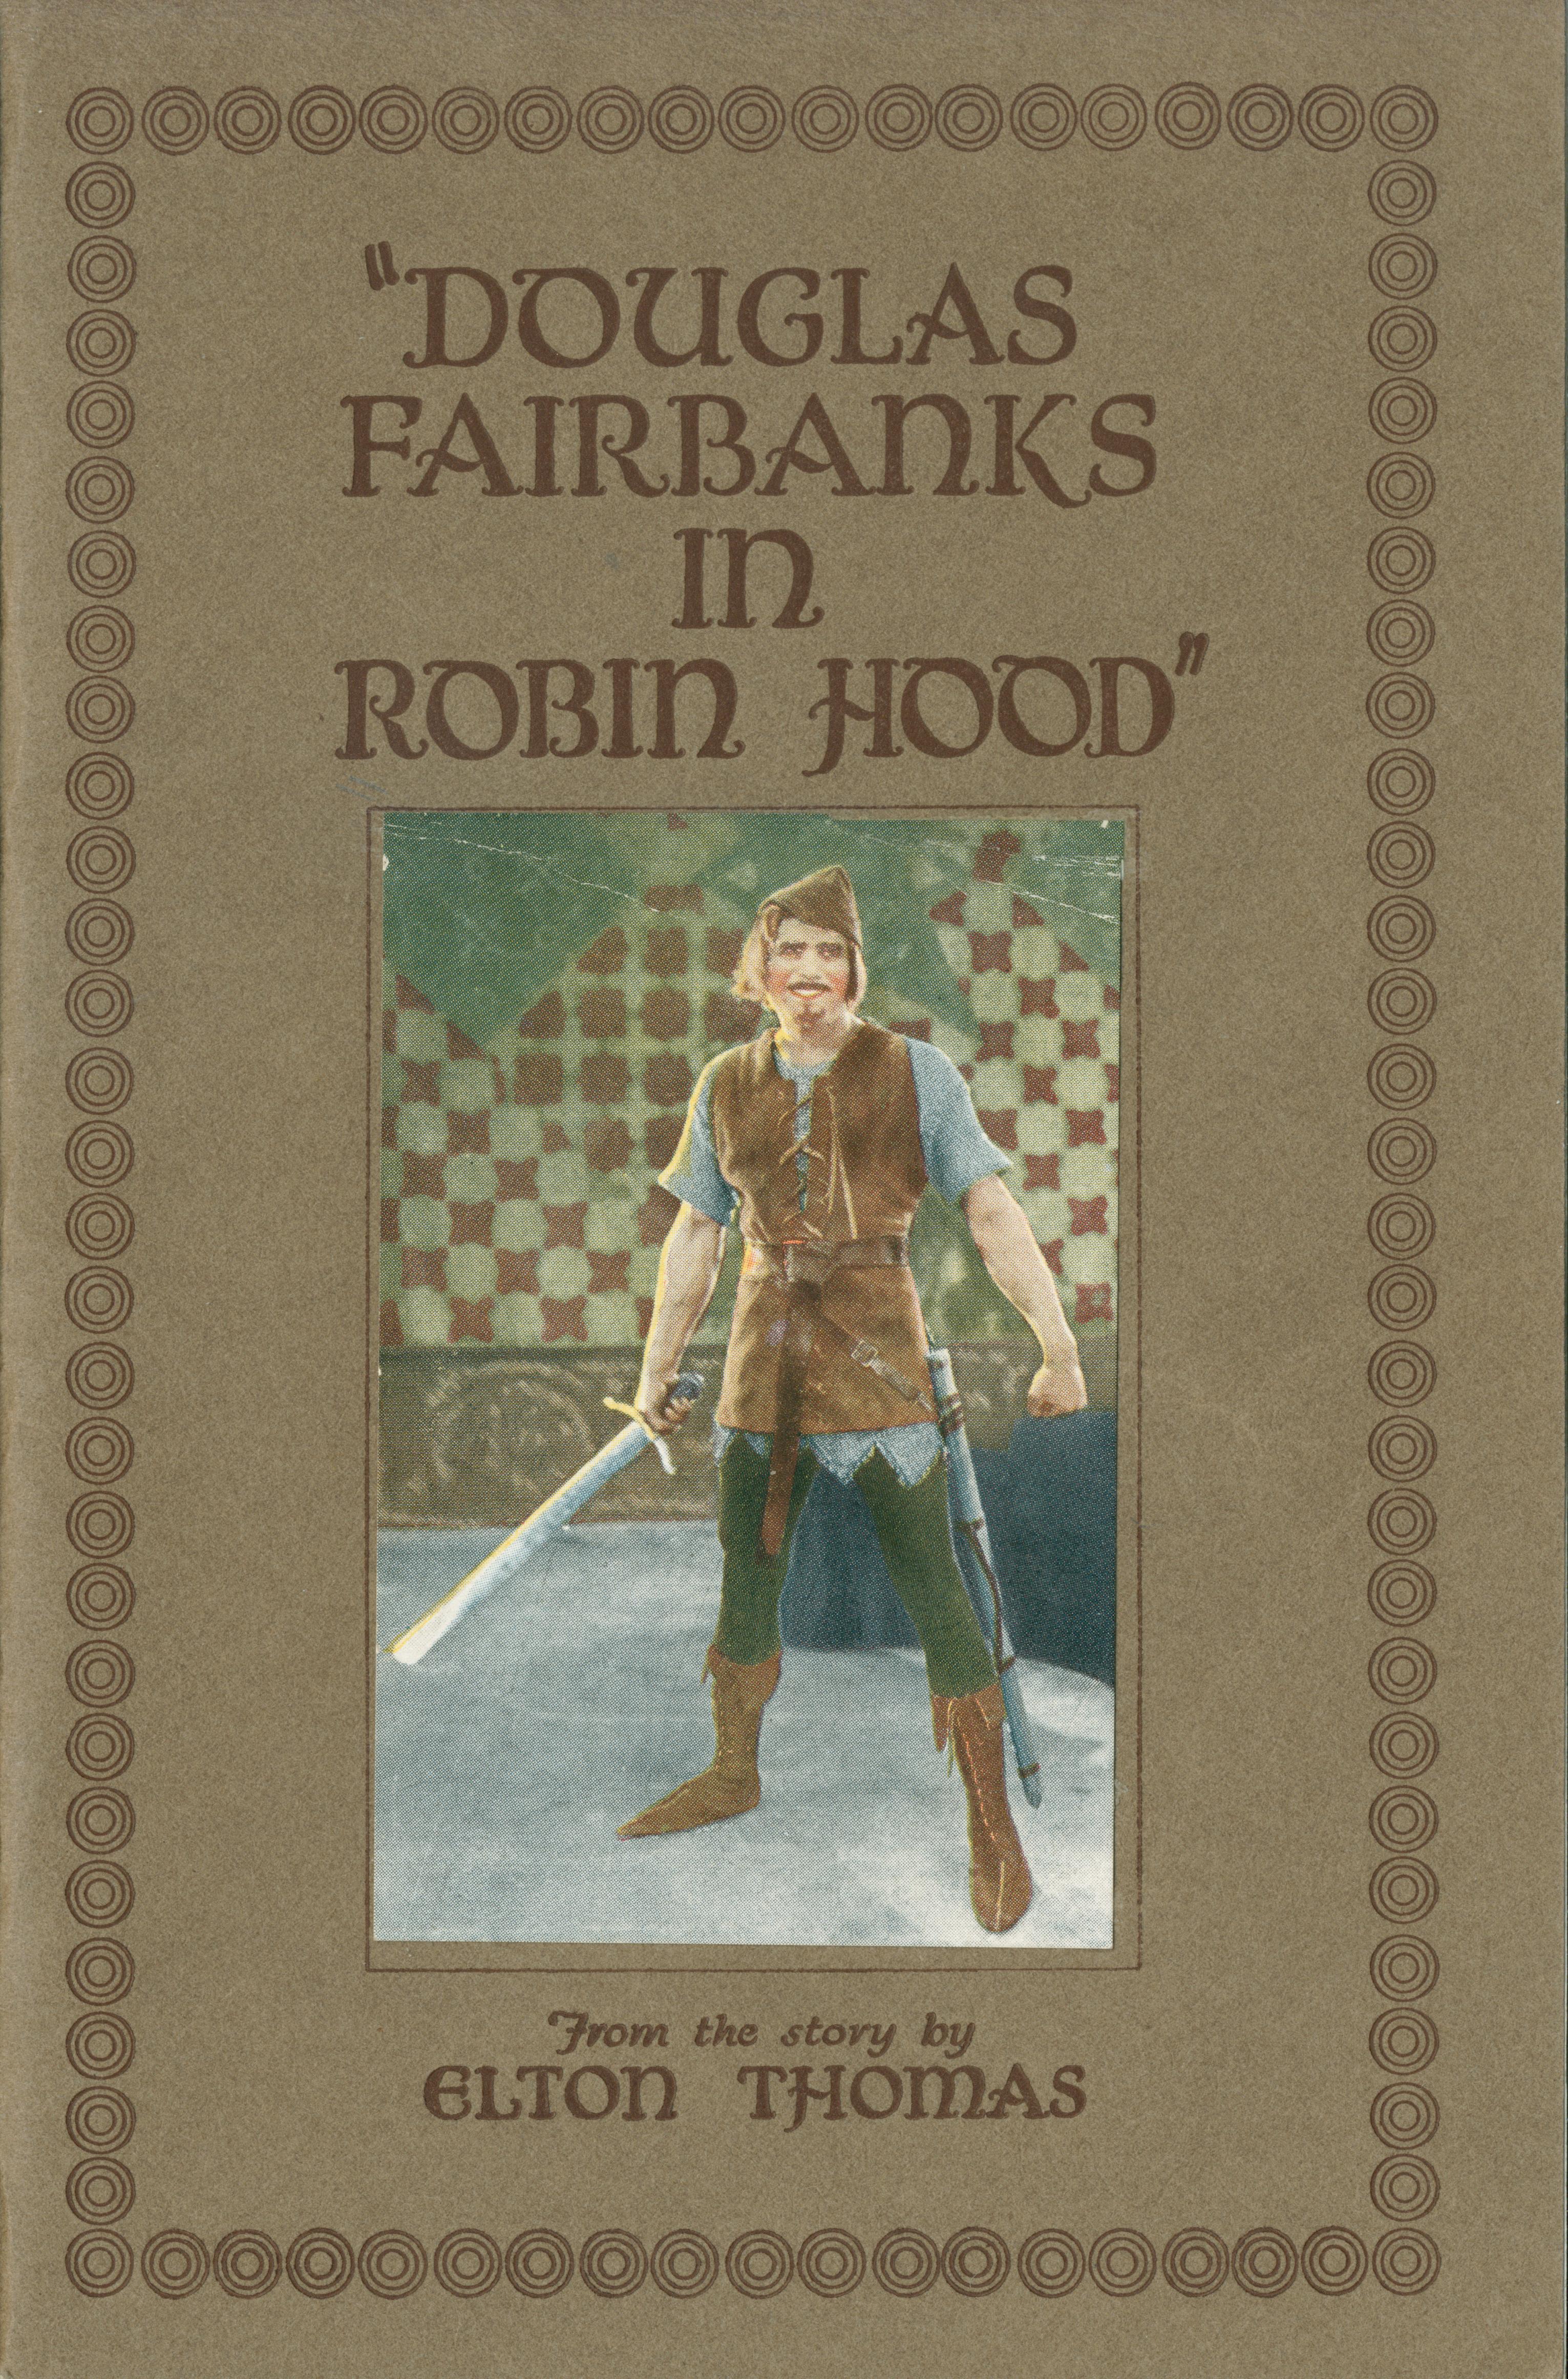 The front cover shows an image of Douglas Fairbanks as Robin Hood